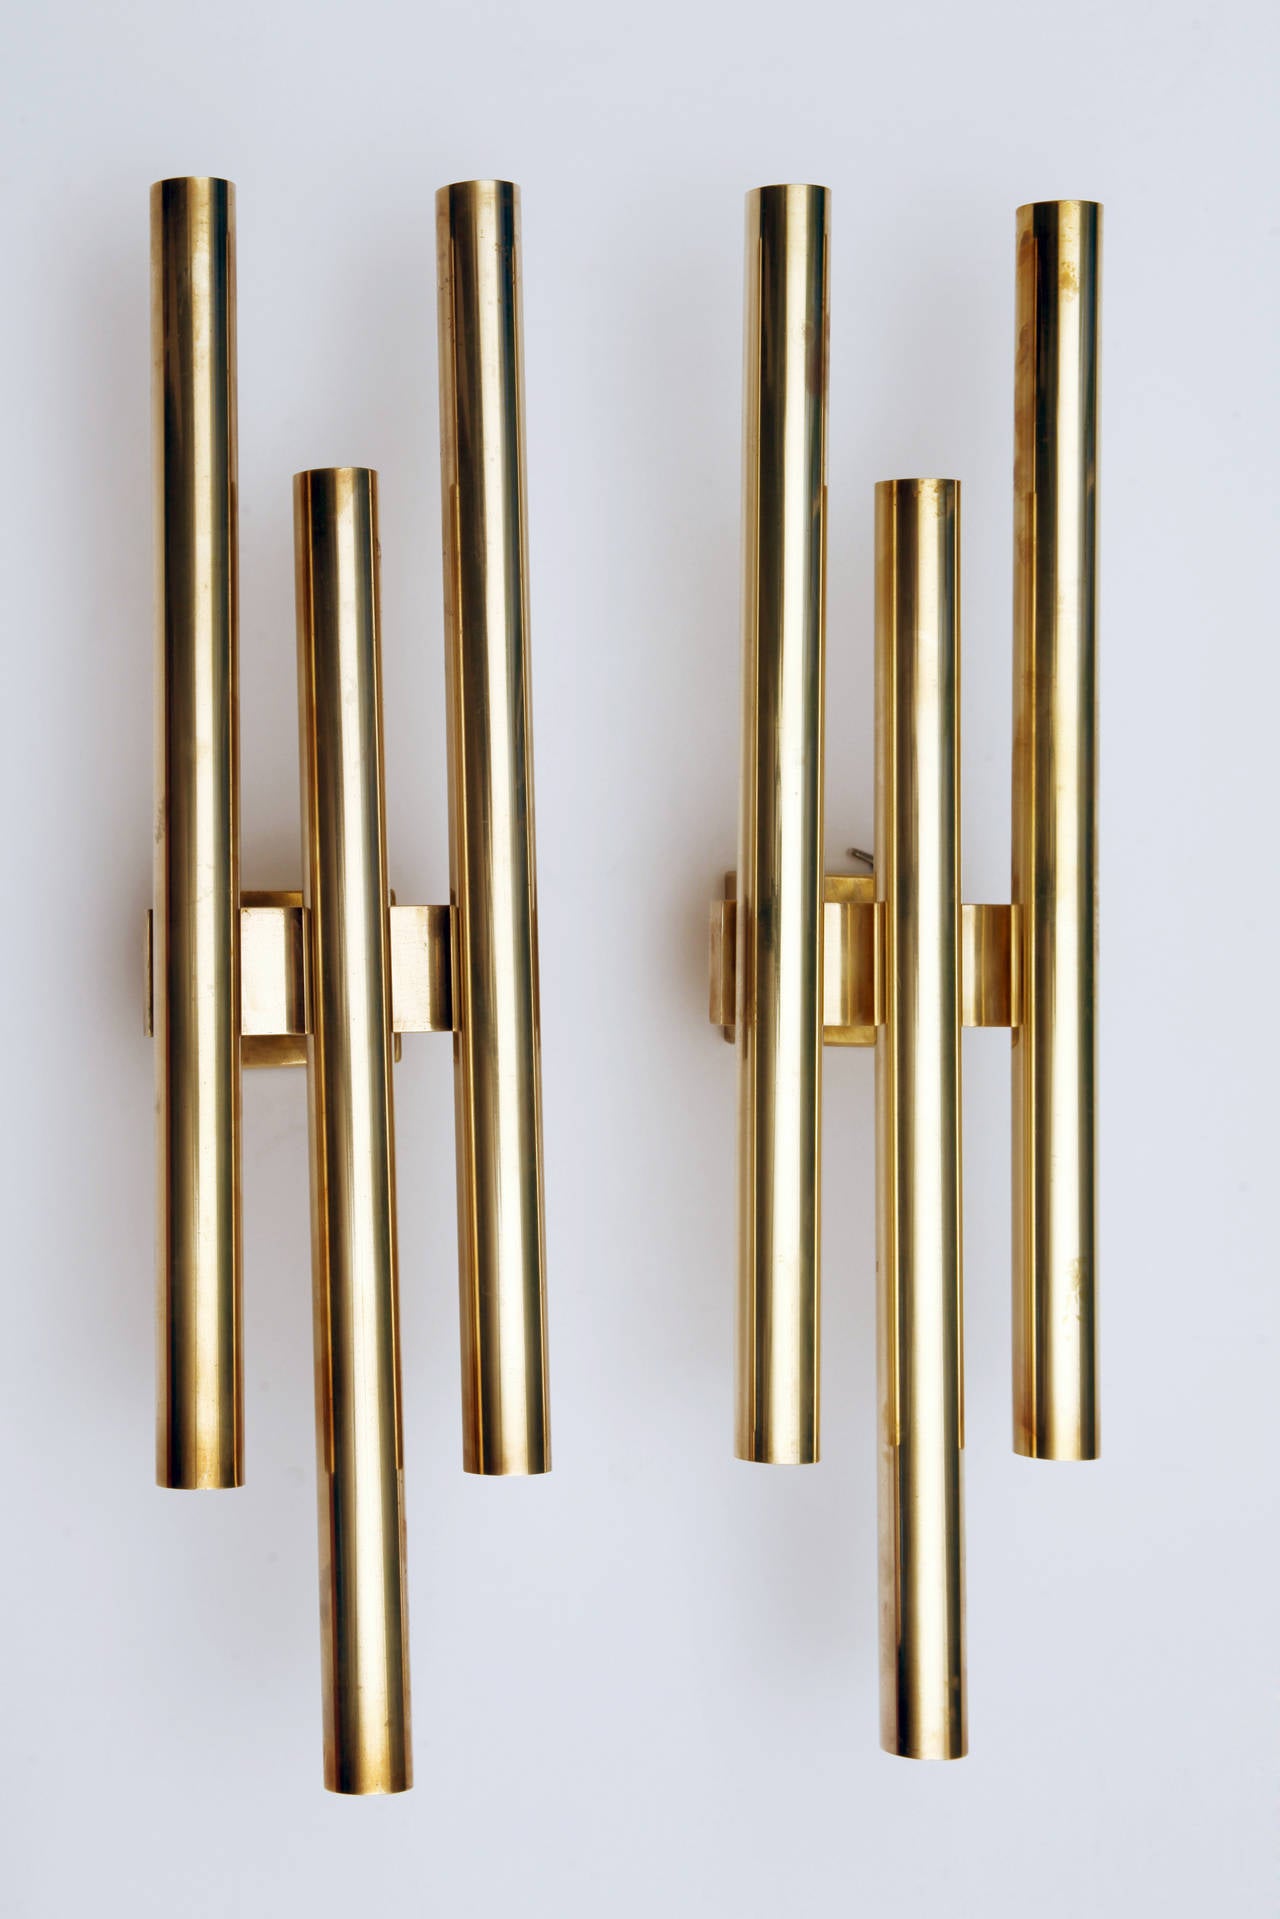 a pair of GIO PONTI sconces
produced by Candle 1960 
6 lights each 

Measures: h. 49 cm x 15 x 11 cm 
perfect condition